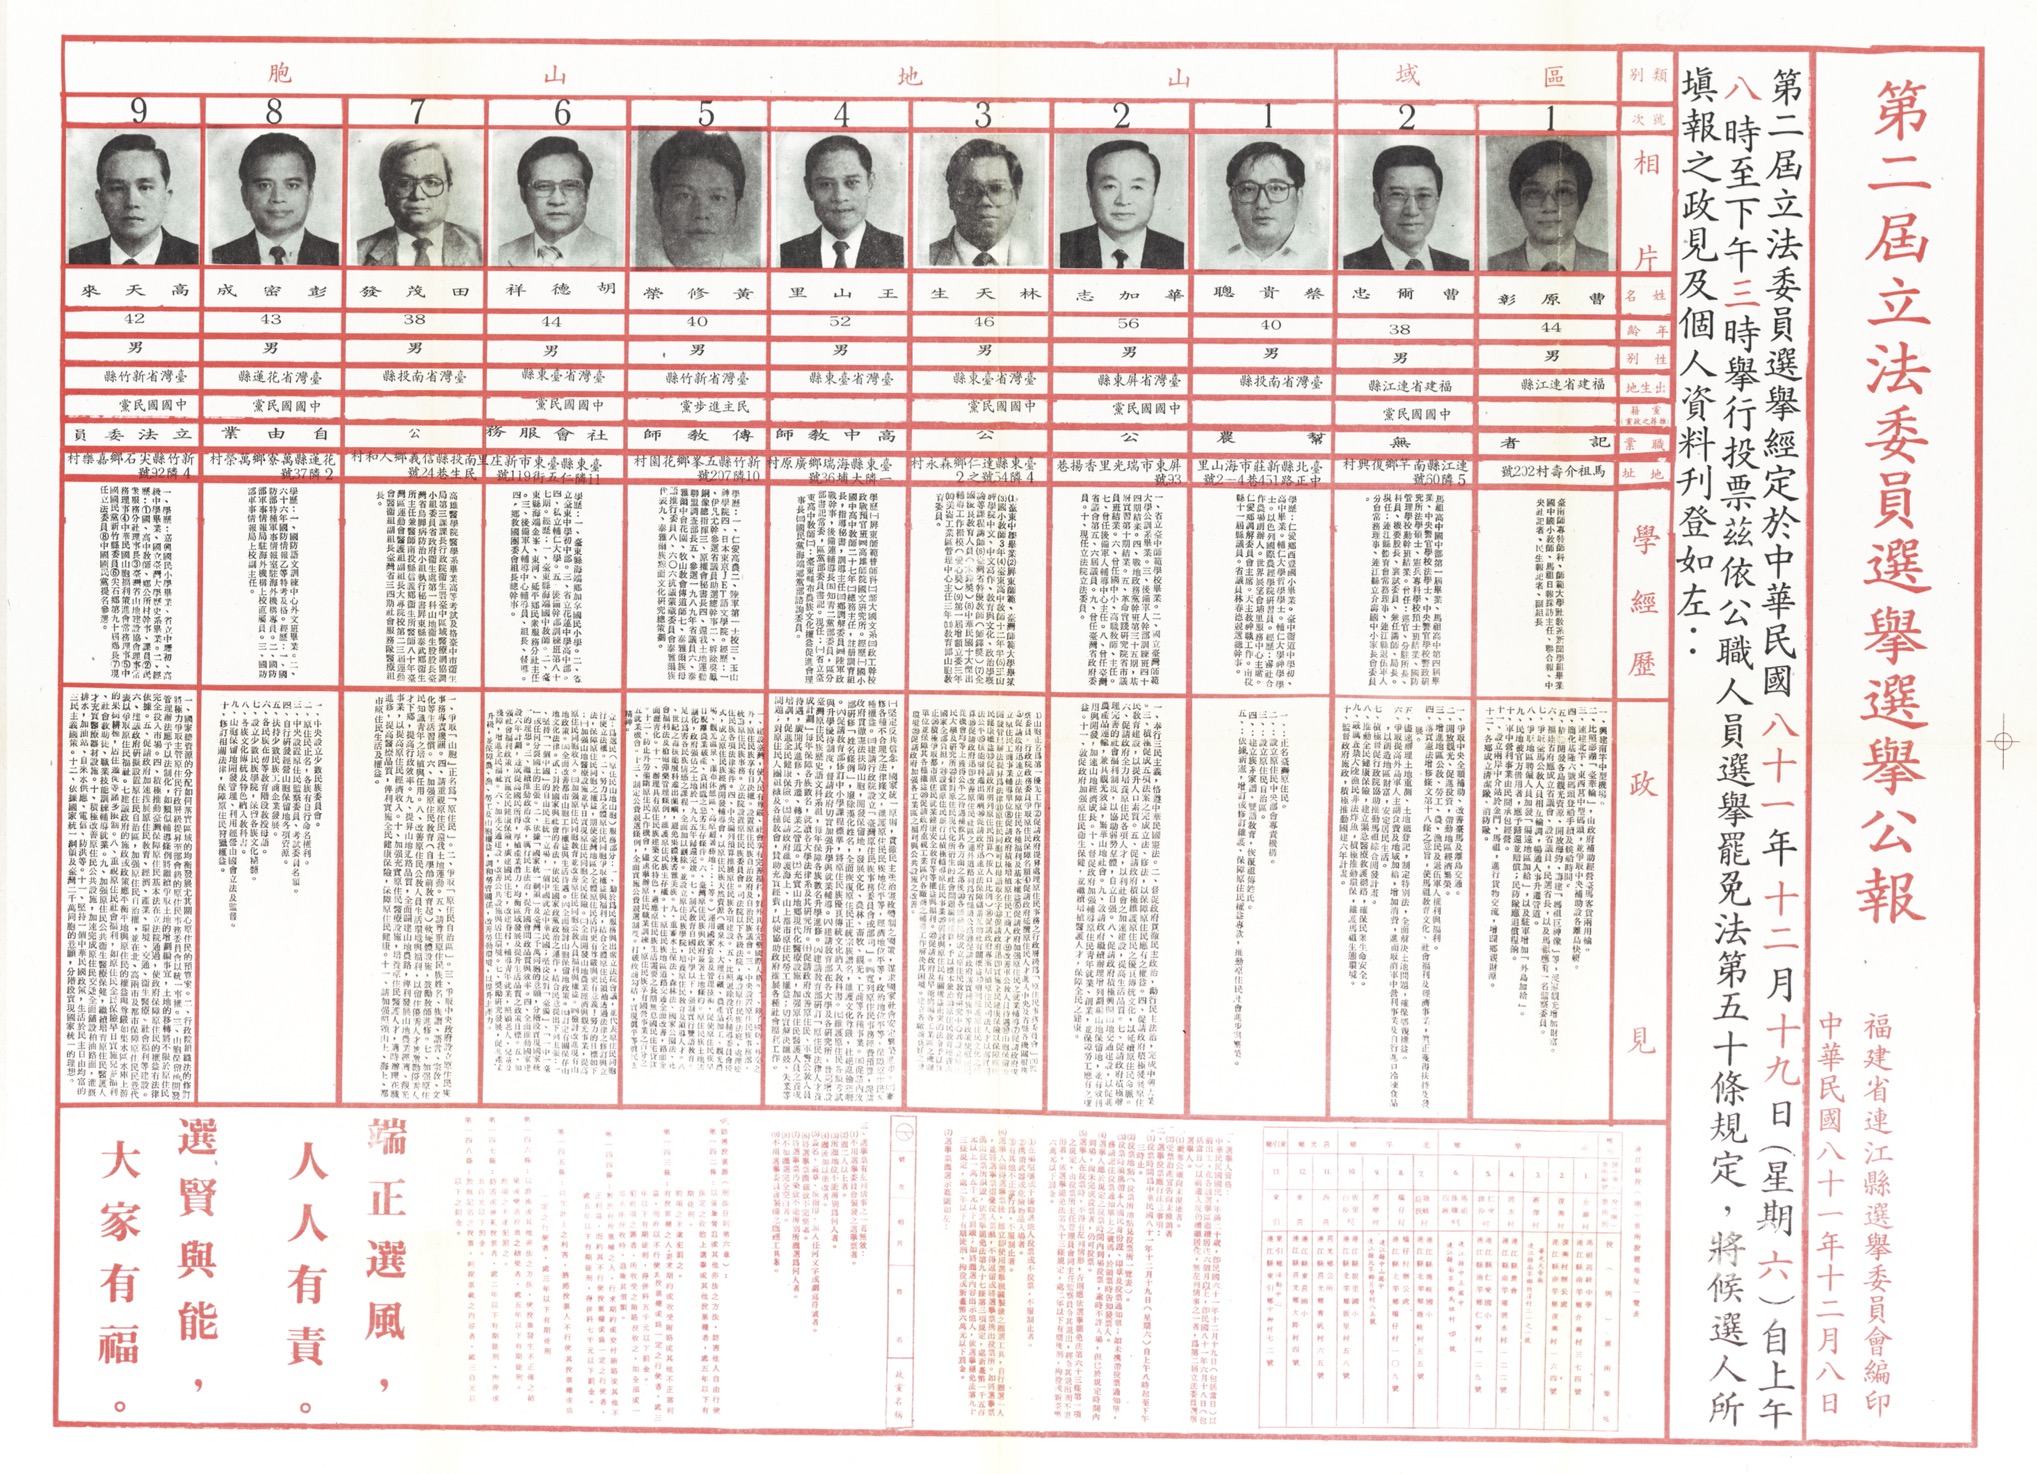 December 1991, the bulletin of the Lienchiang County Second Legislative Yuan election.